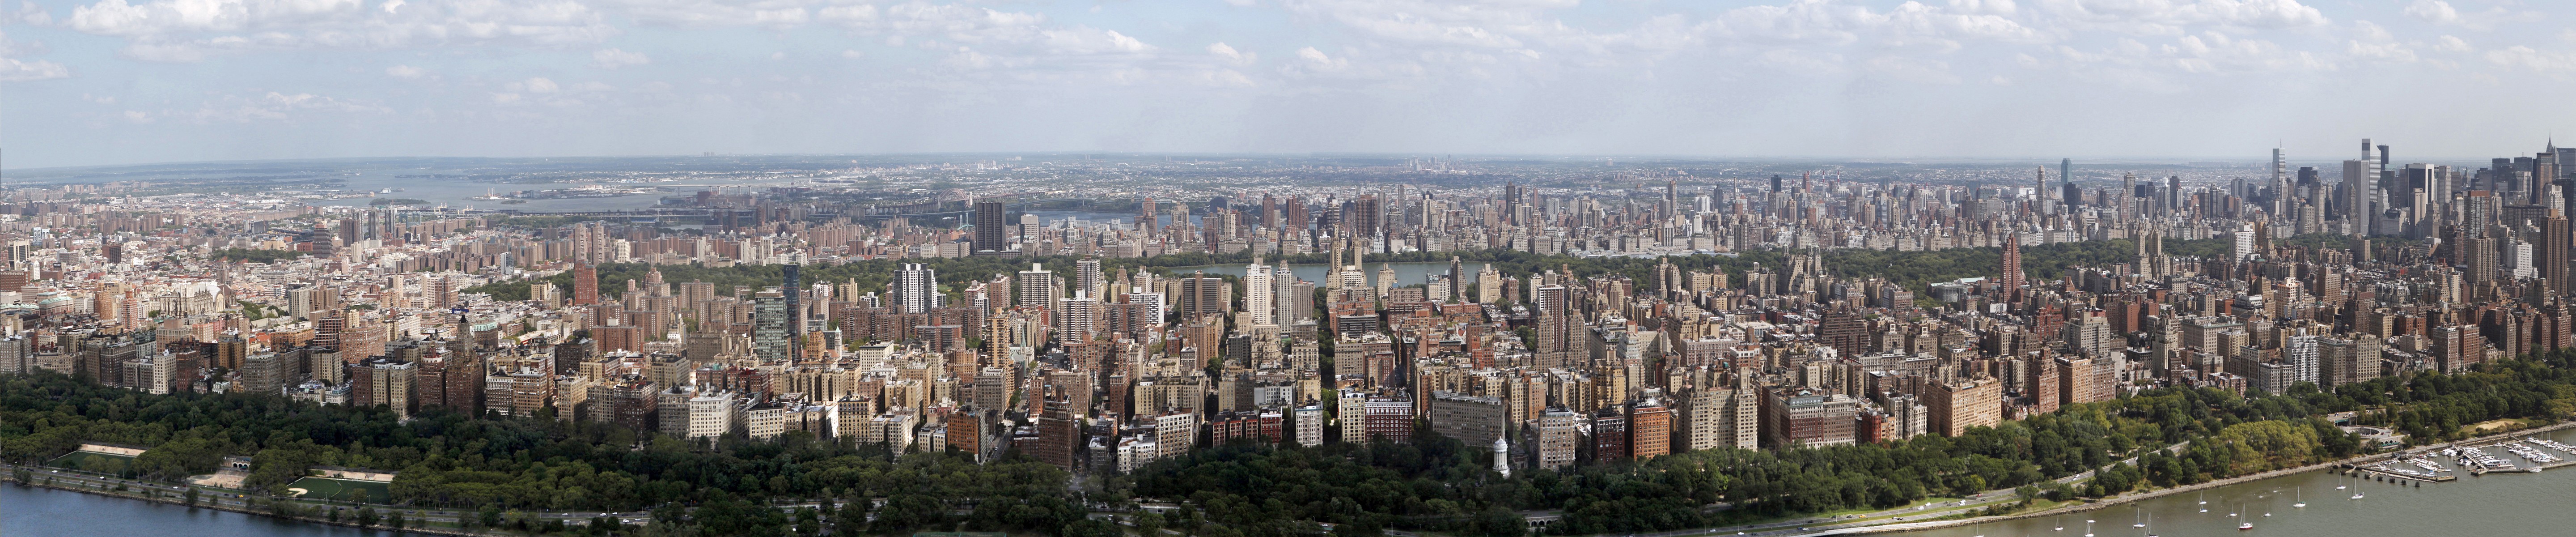 General 5760x1200 New York City triple screen USA cityscape panorama aerial view